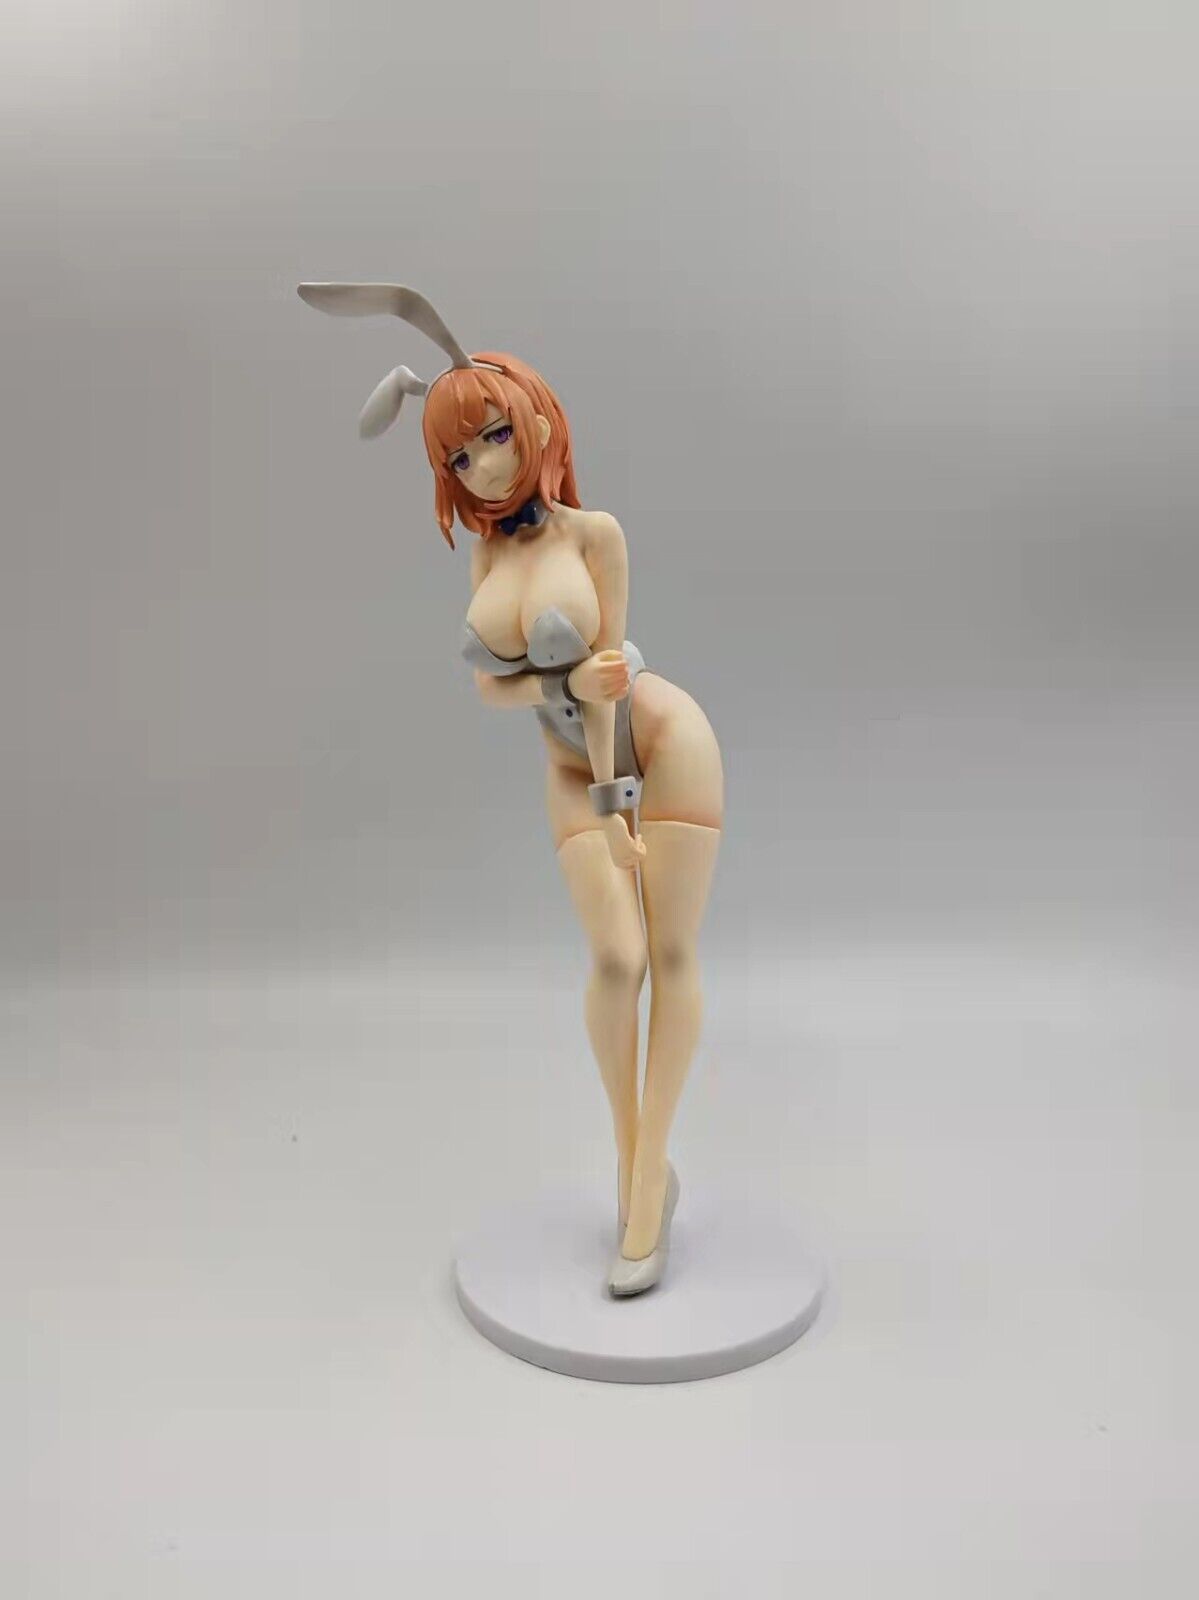 New  23CM  Anime statue Characters Figures PVC Toy  Collect toy gift No box